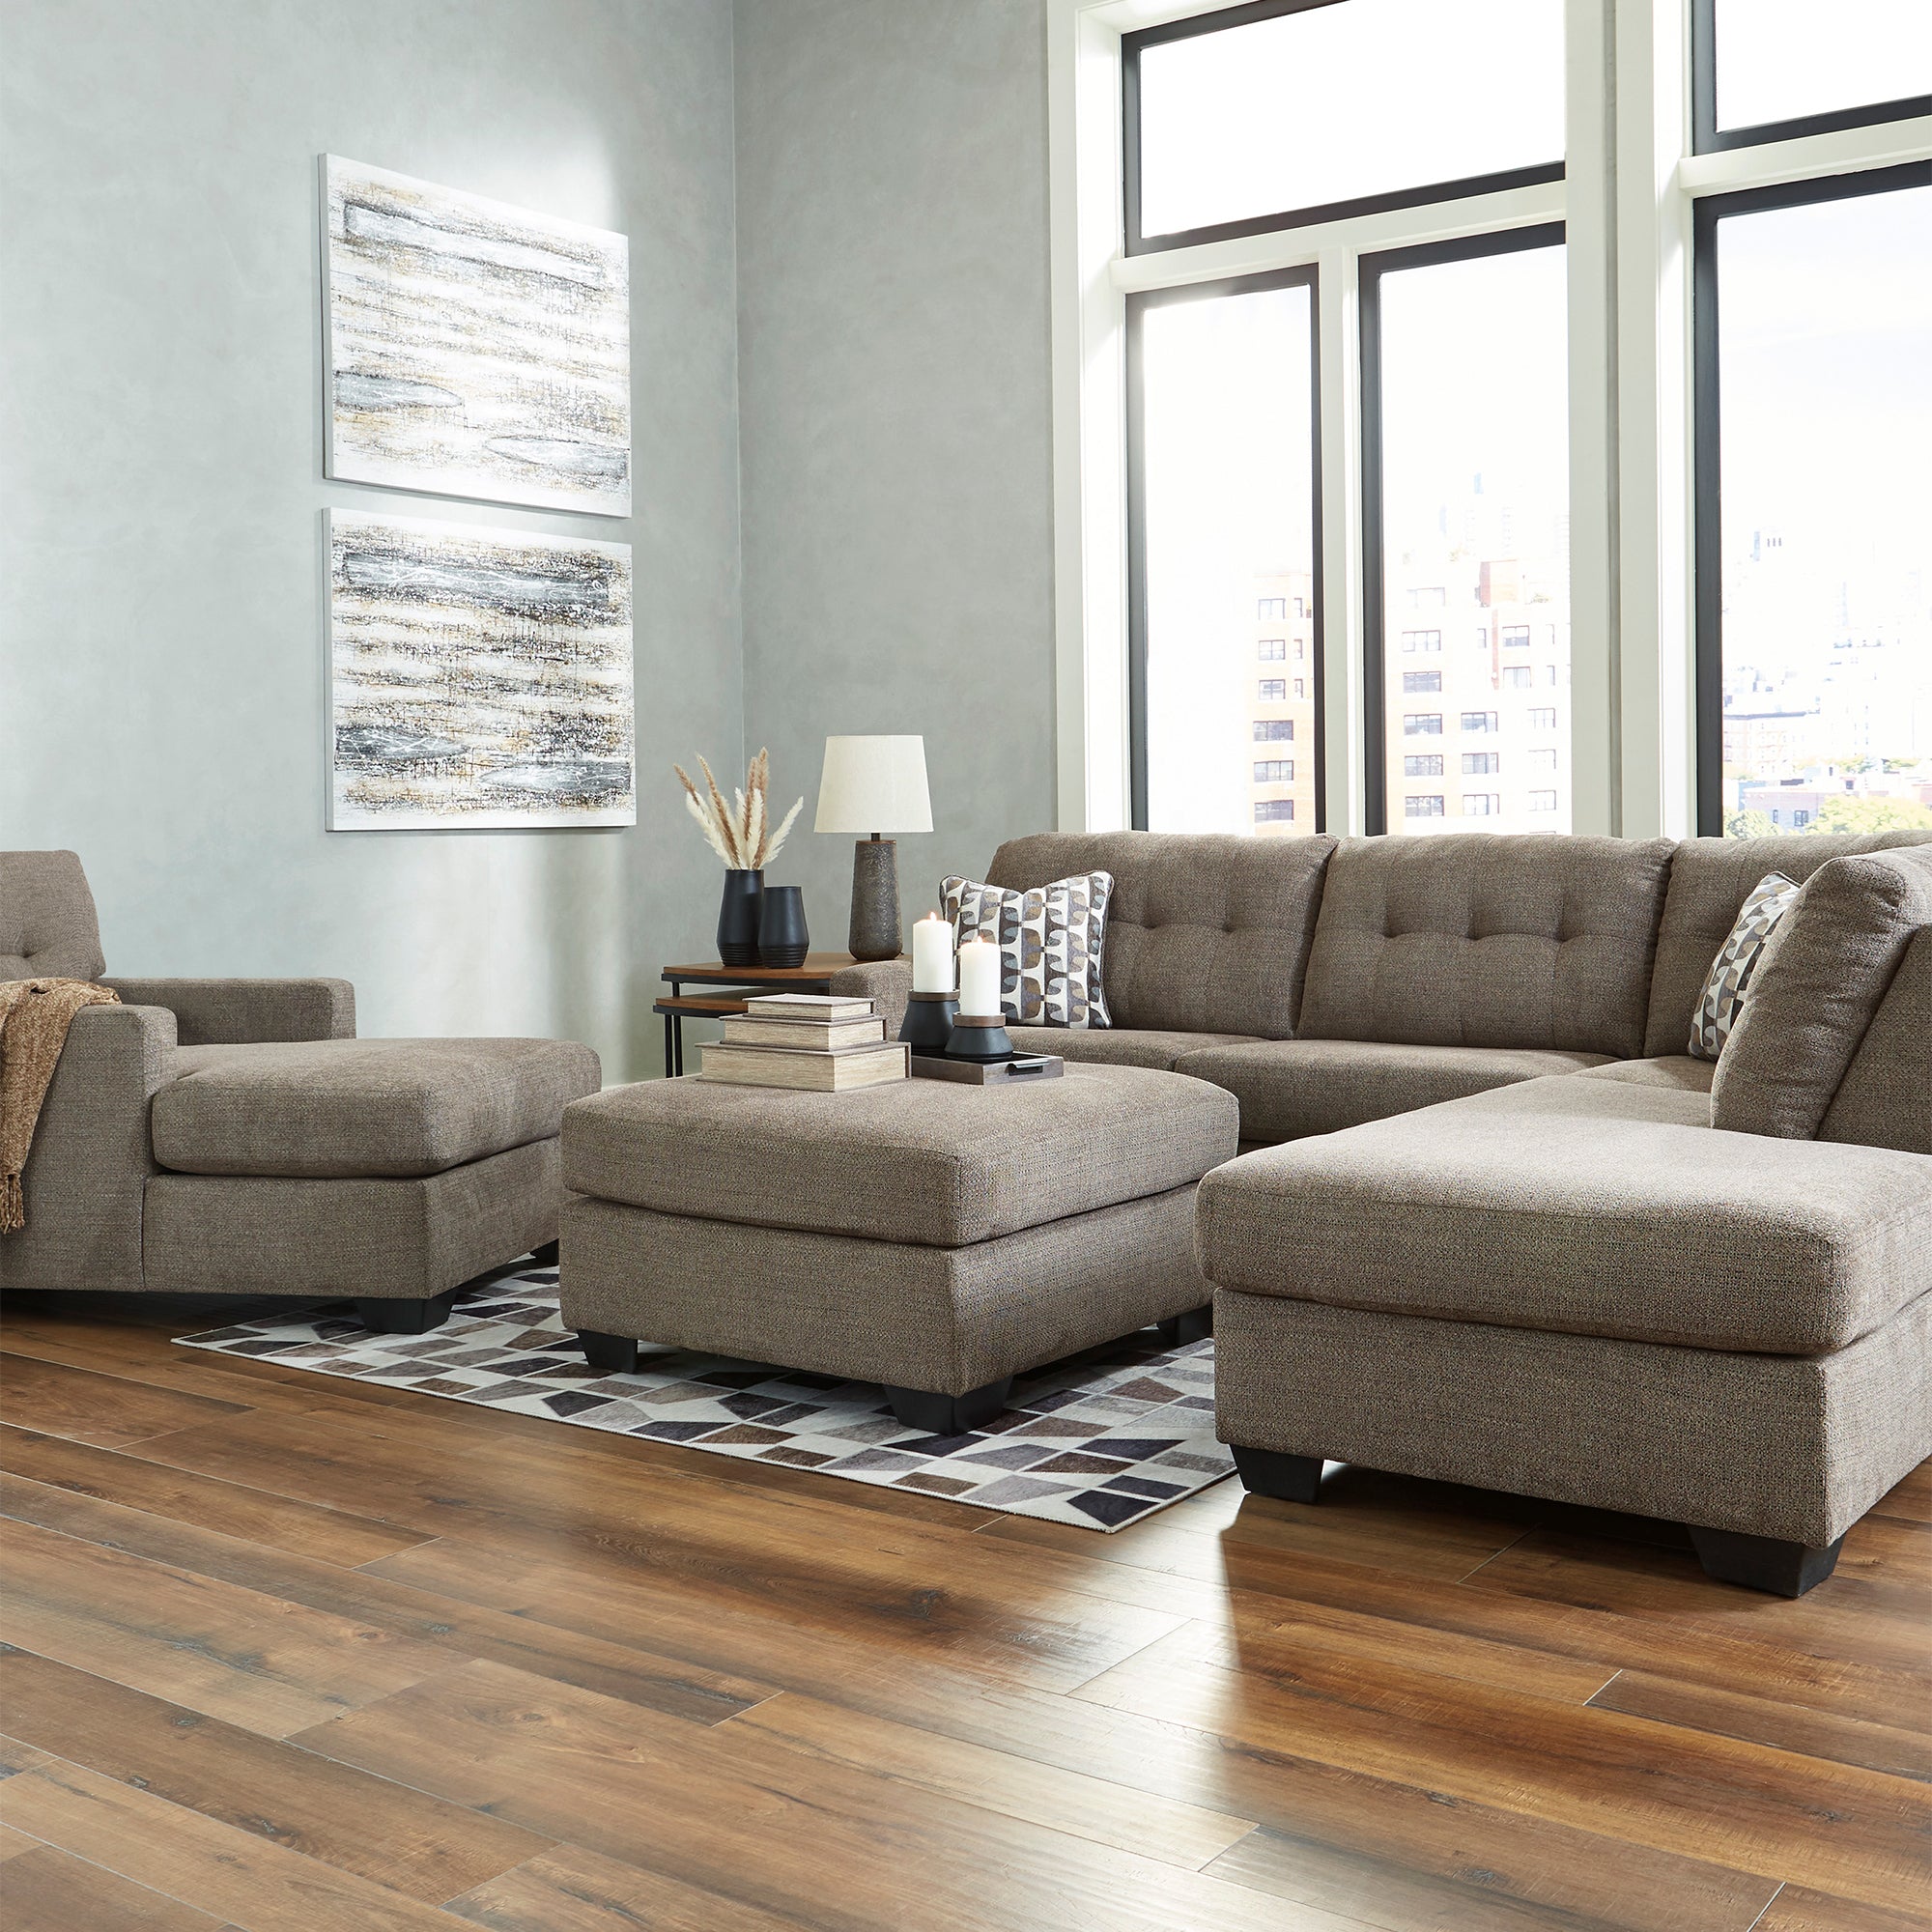 Inviting Mahoney 2-Piece Sectional with chaise in a warm chocolate hue, perfect for family rooms